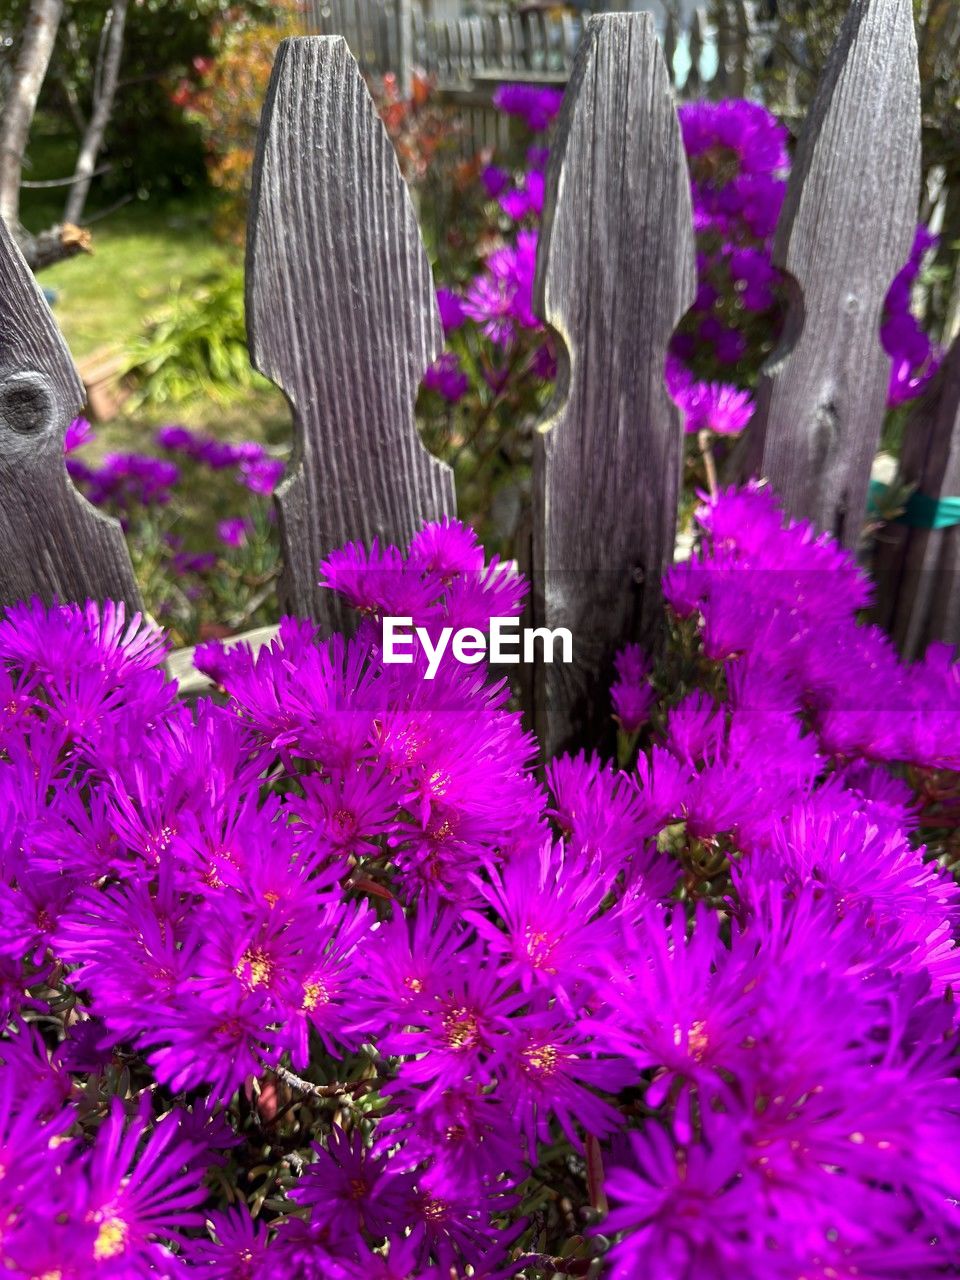 plant, flower, flowering plant, growth, beauty in nature, nature, freshness, purple, no people, day, fragility, pink, close-up, outdoors, blossom, flower head, springtime, fence, inflorescence, petal